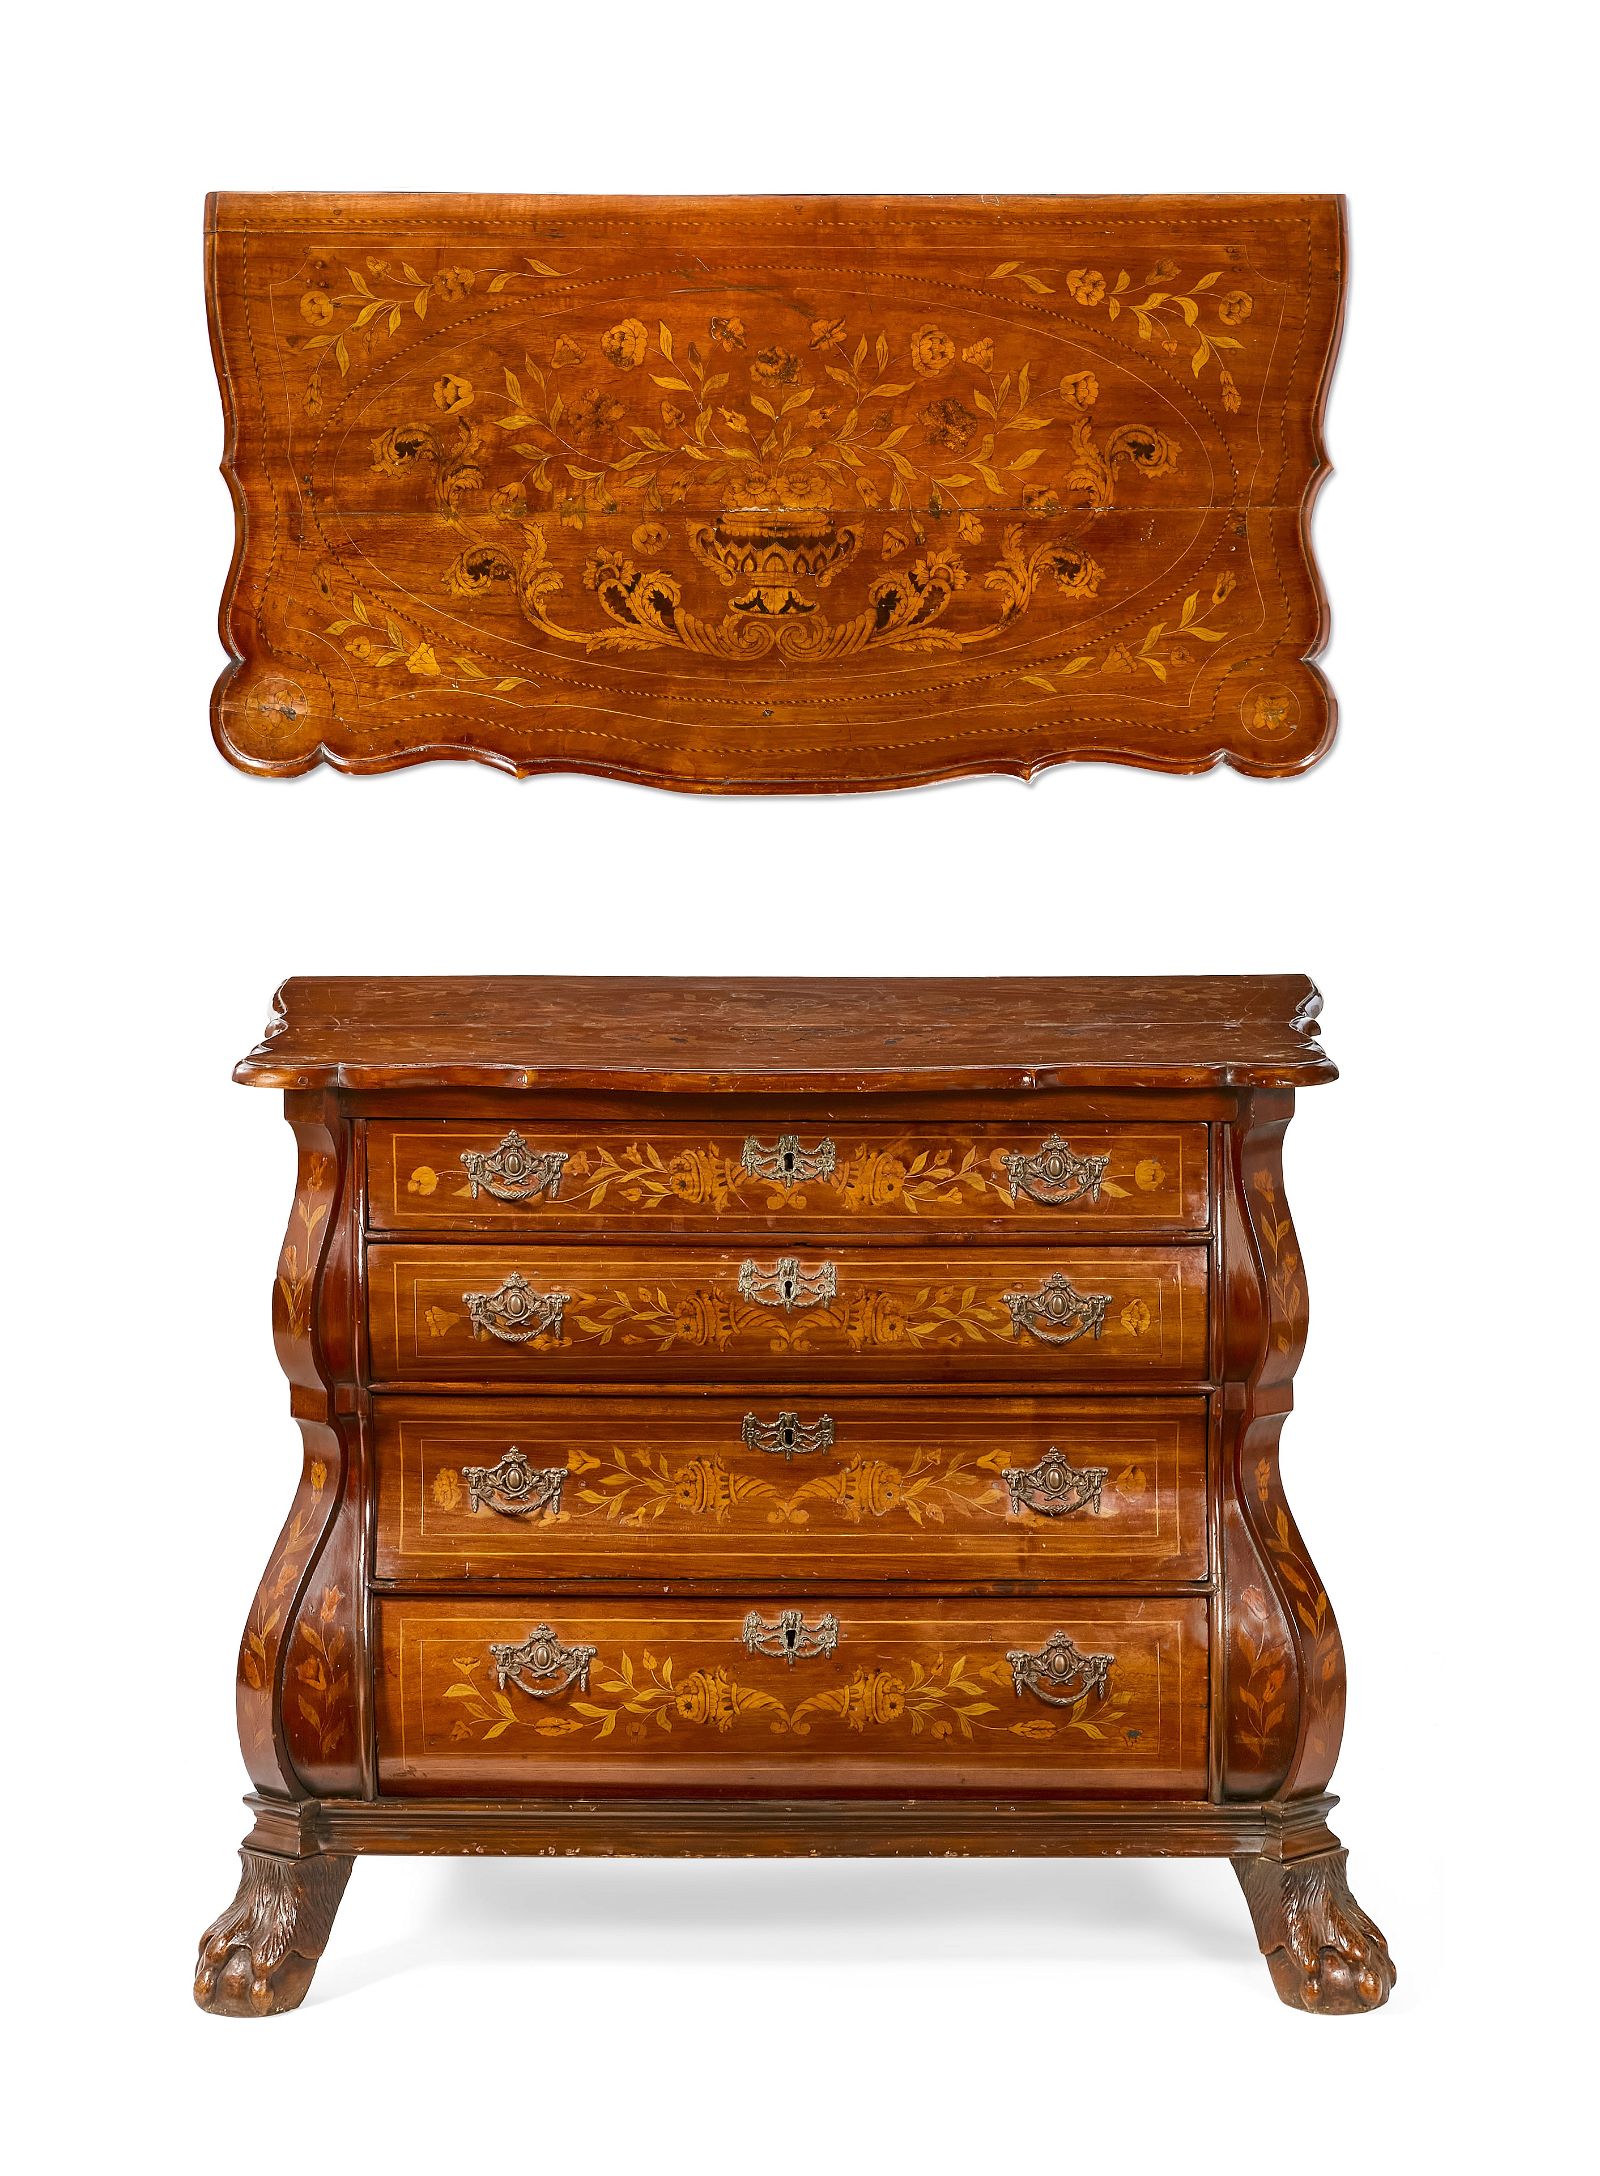 A DUTCH WALNUT AND MARQUETRY CHEST